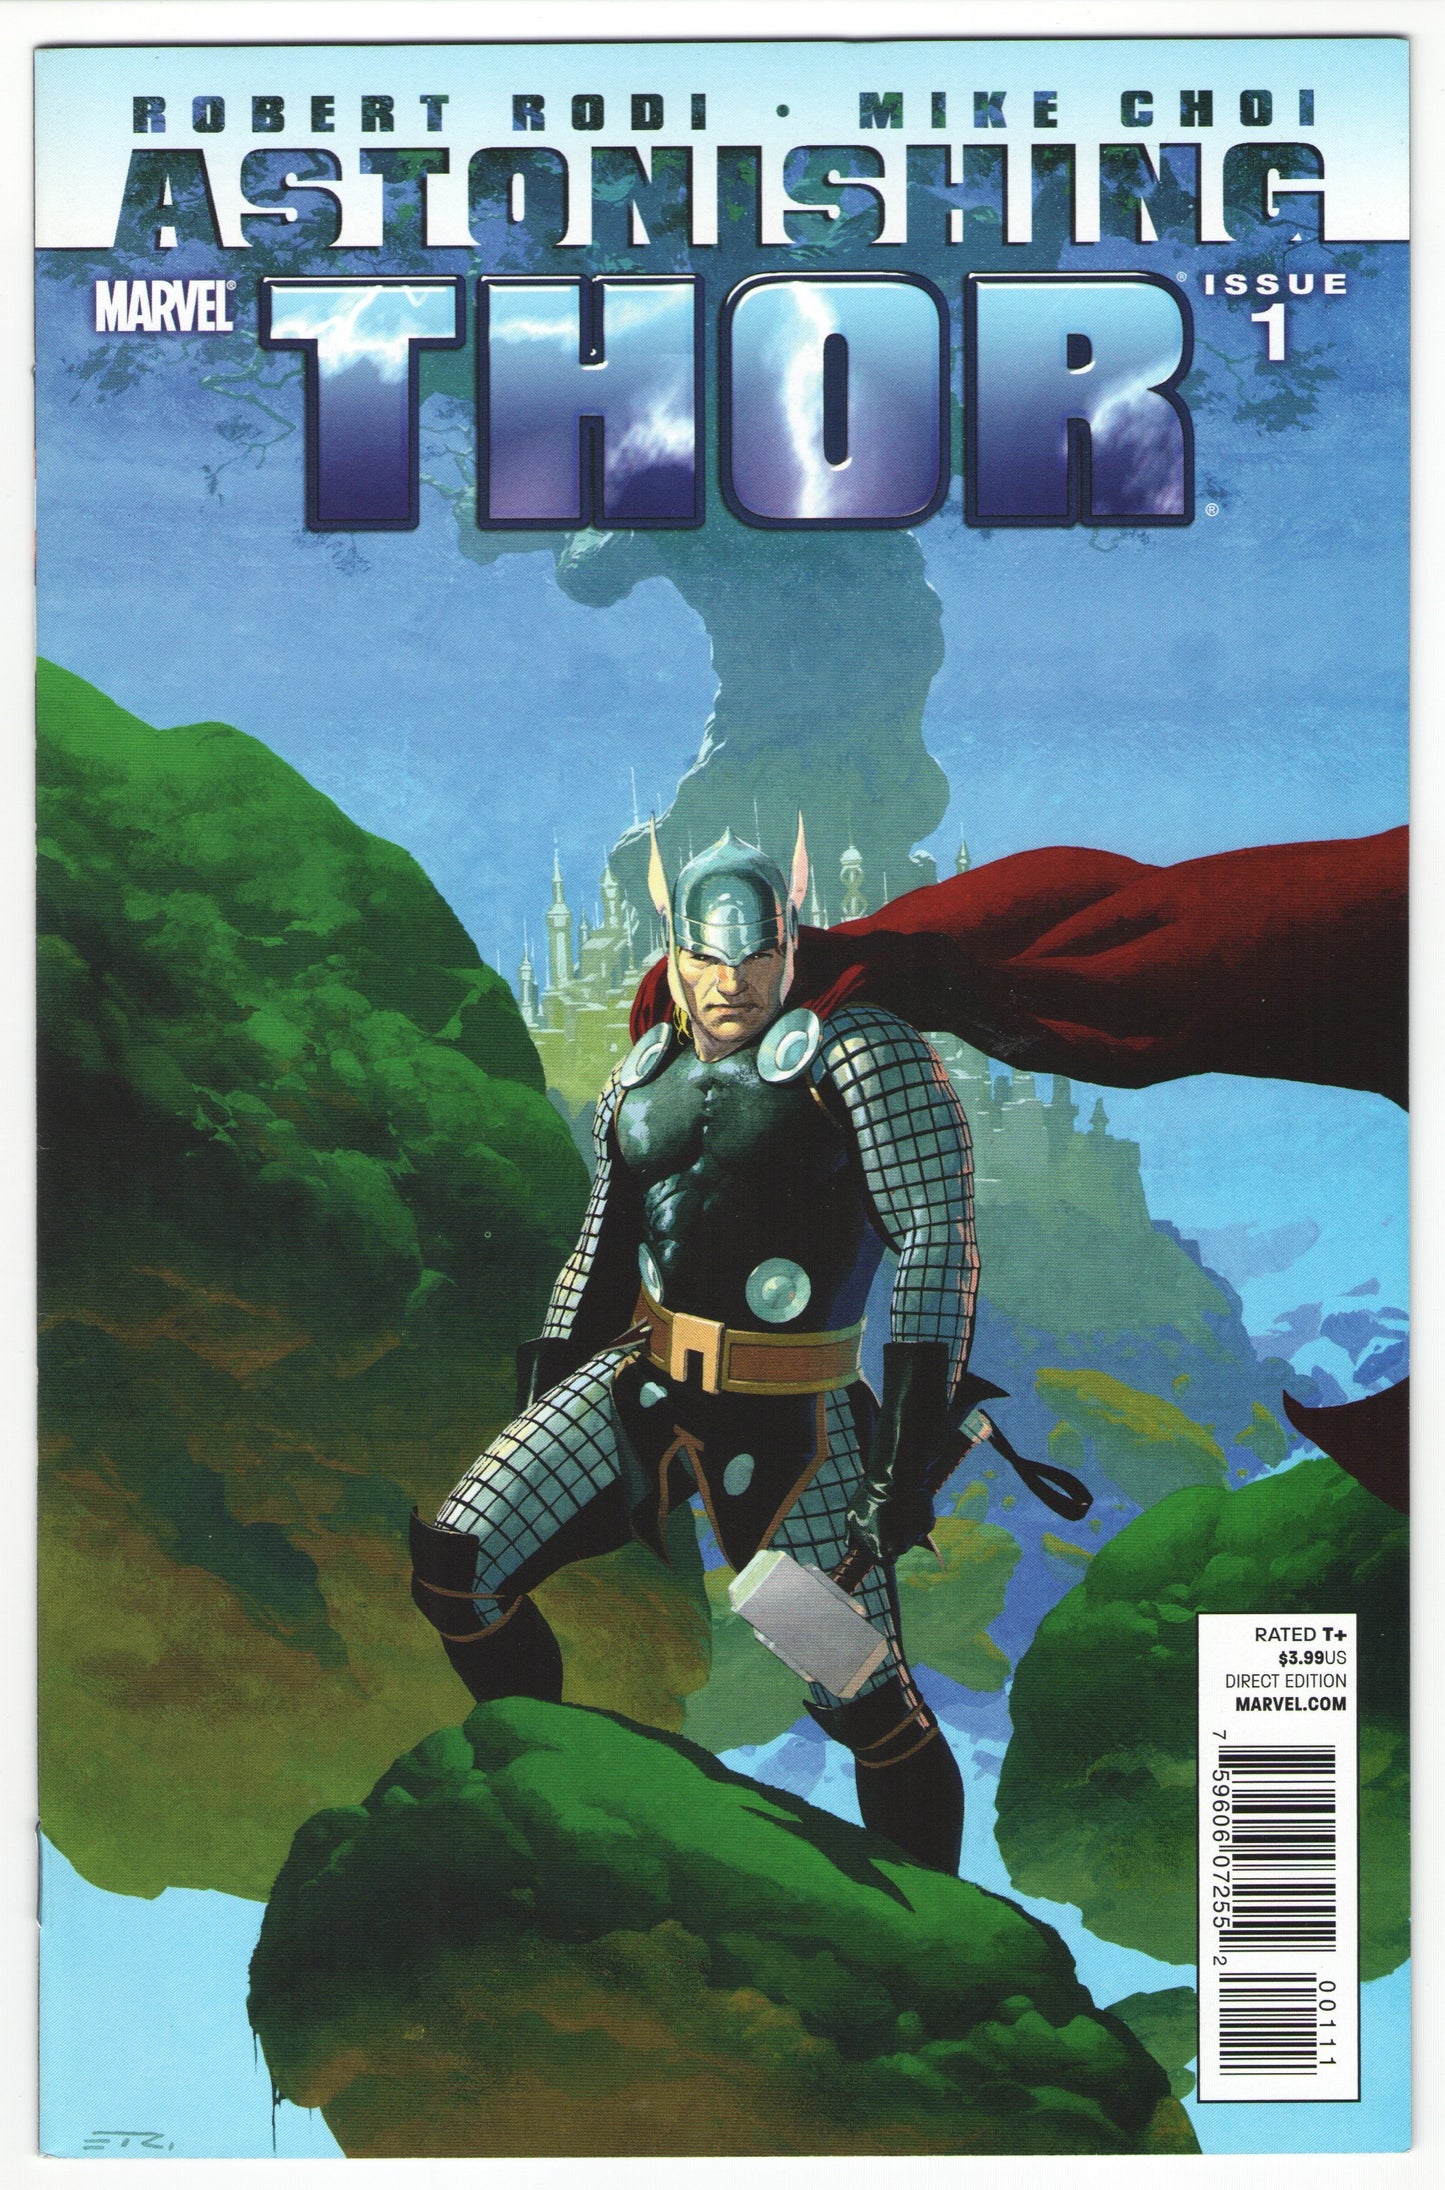 Astonishing Thor (2010) Complete Limited Series